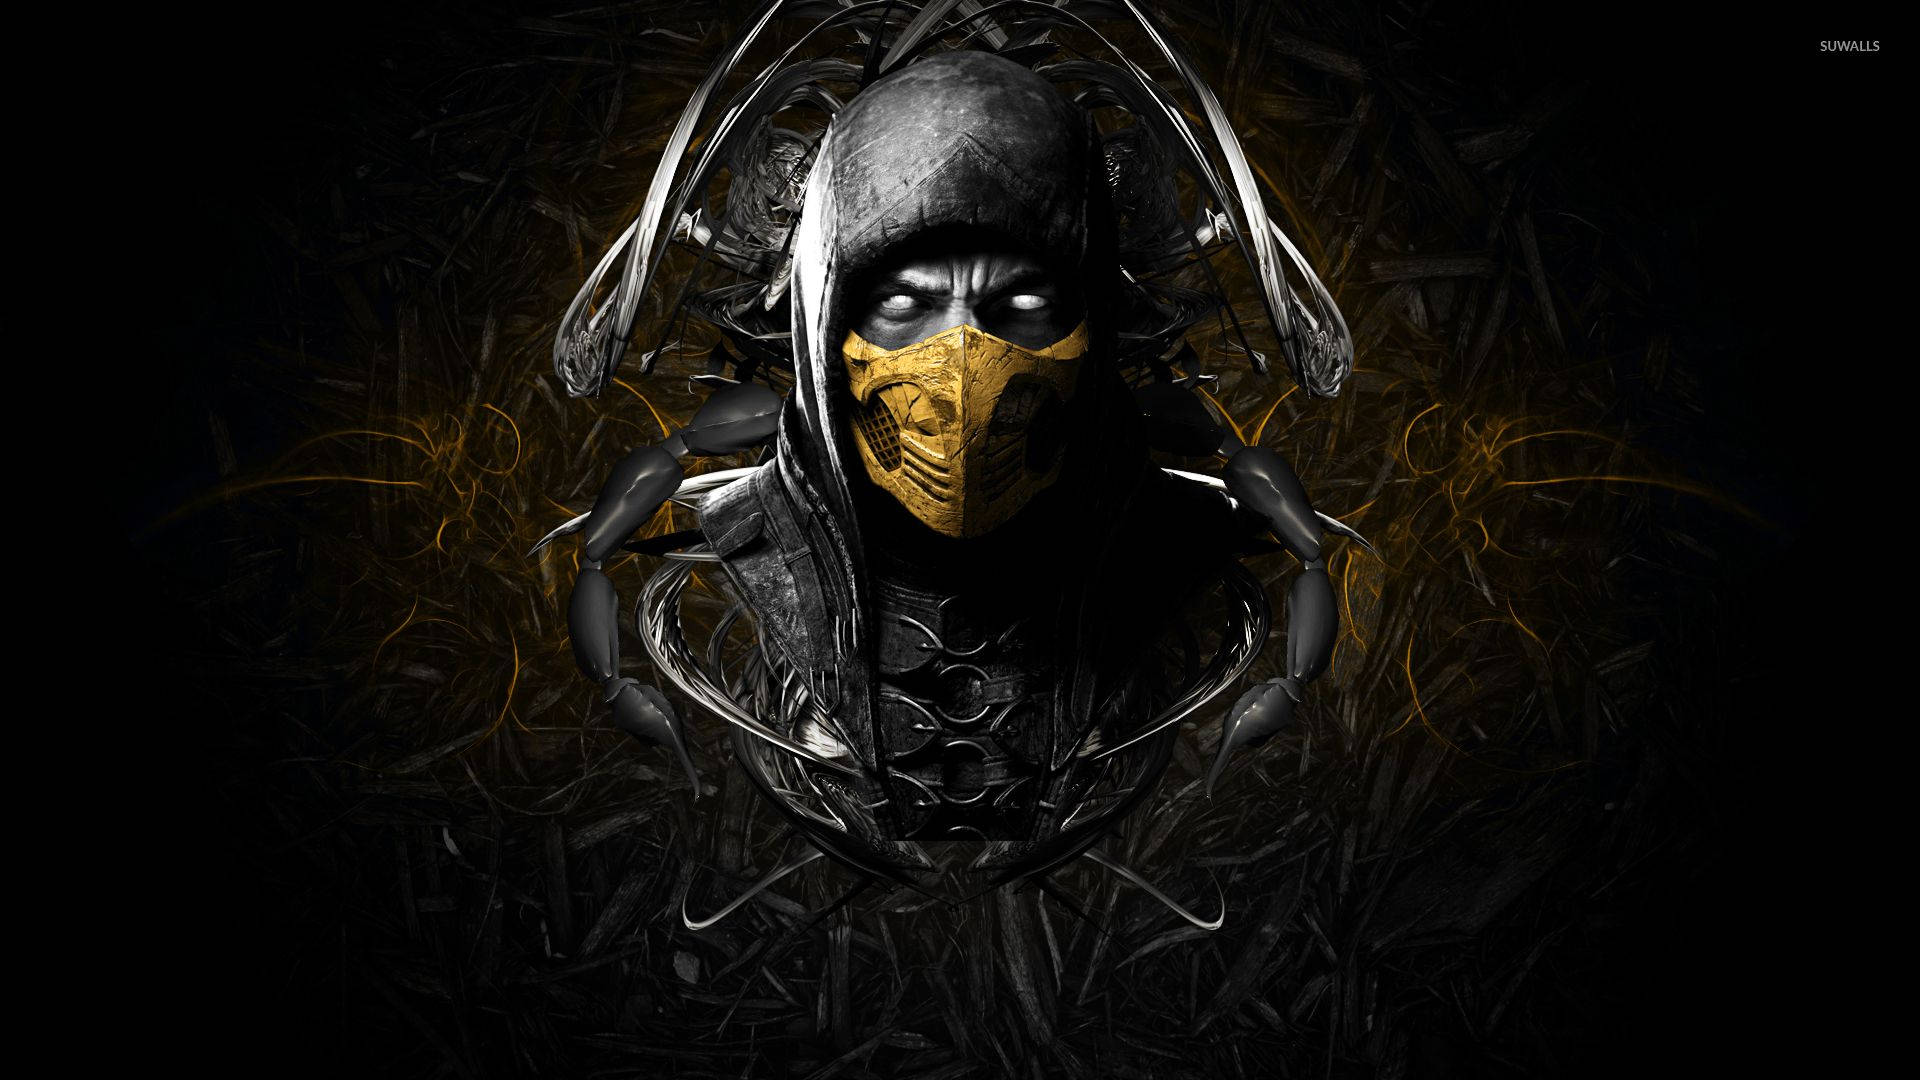 Face your fears with Mortal Kombat's Scorpion Wallpaper